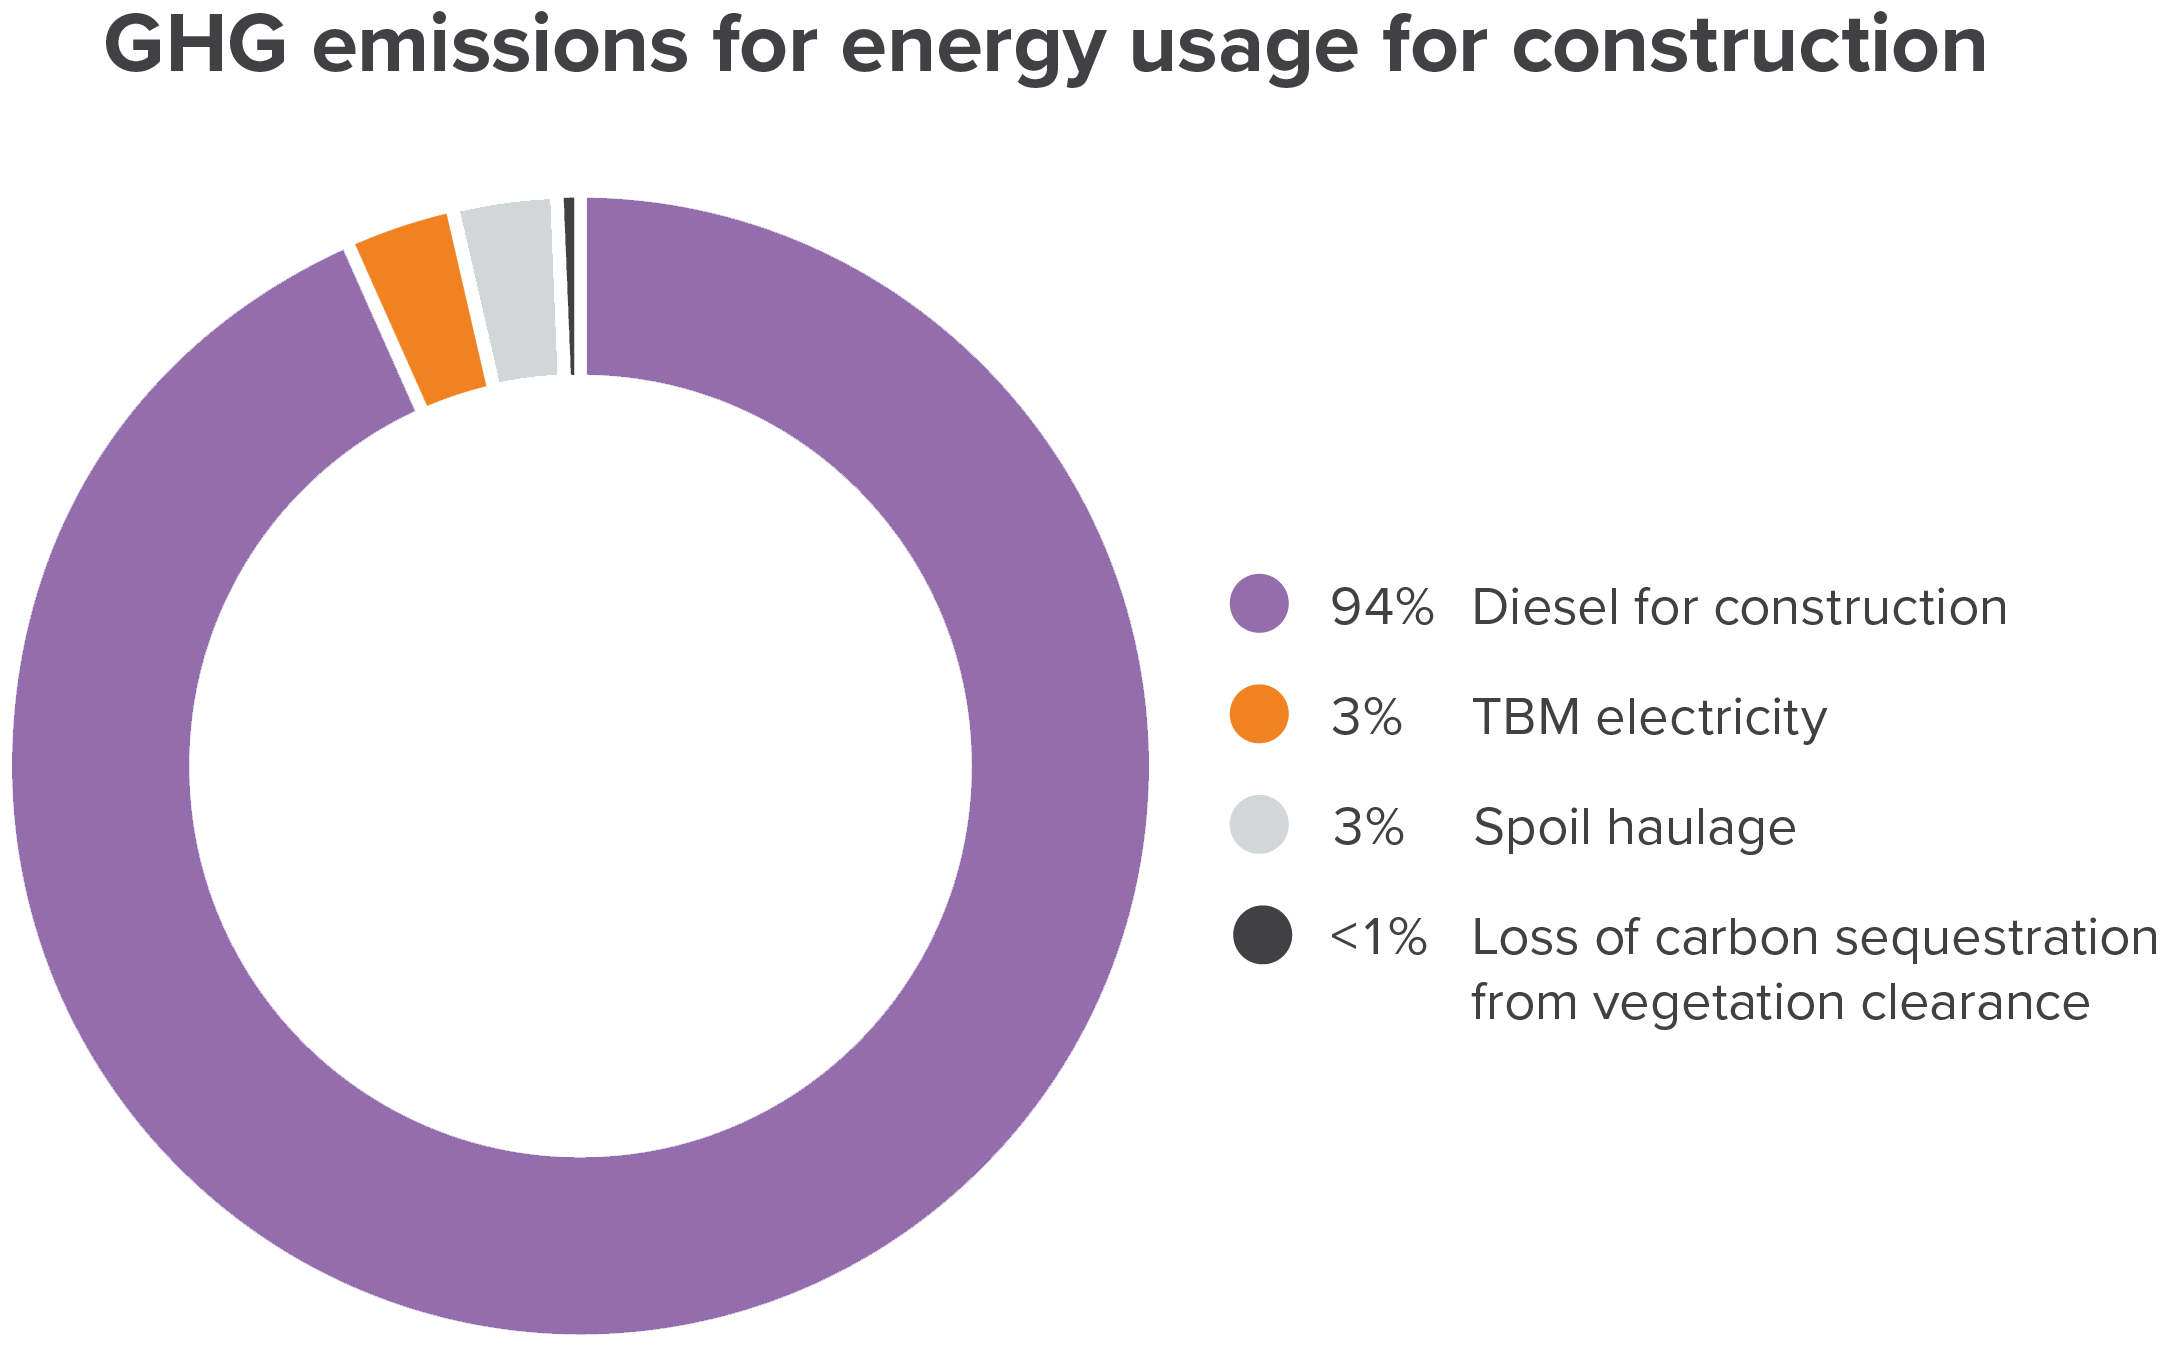 GHG emissions for energy usage for construction; 94% Diesel for construction, 3% TBM electricity, 3% Spoil haulage